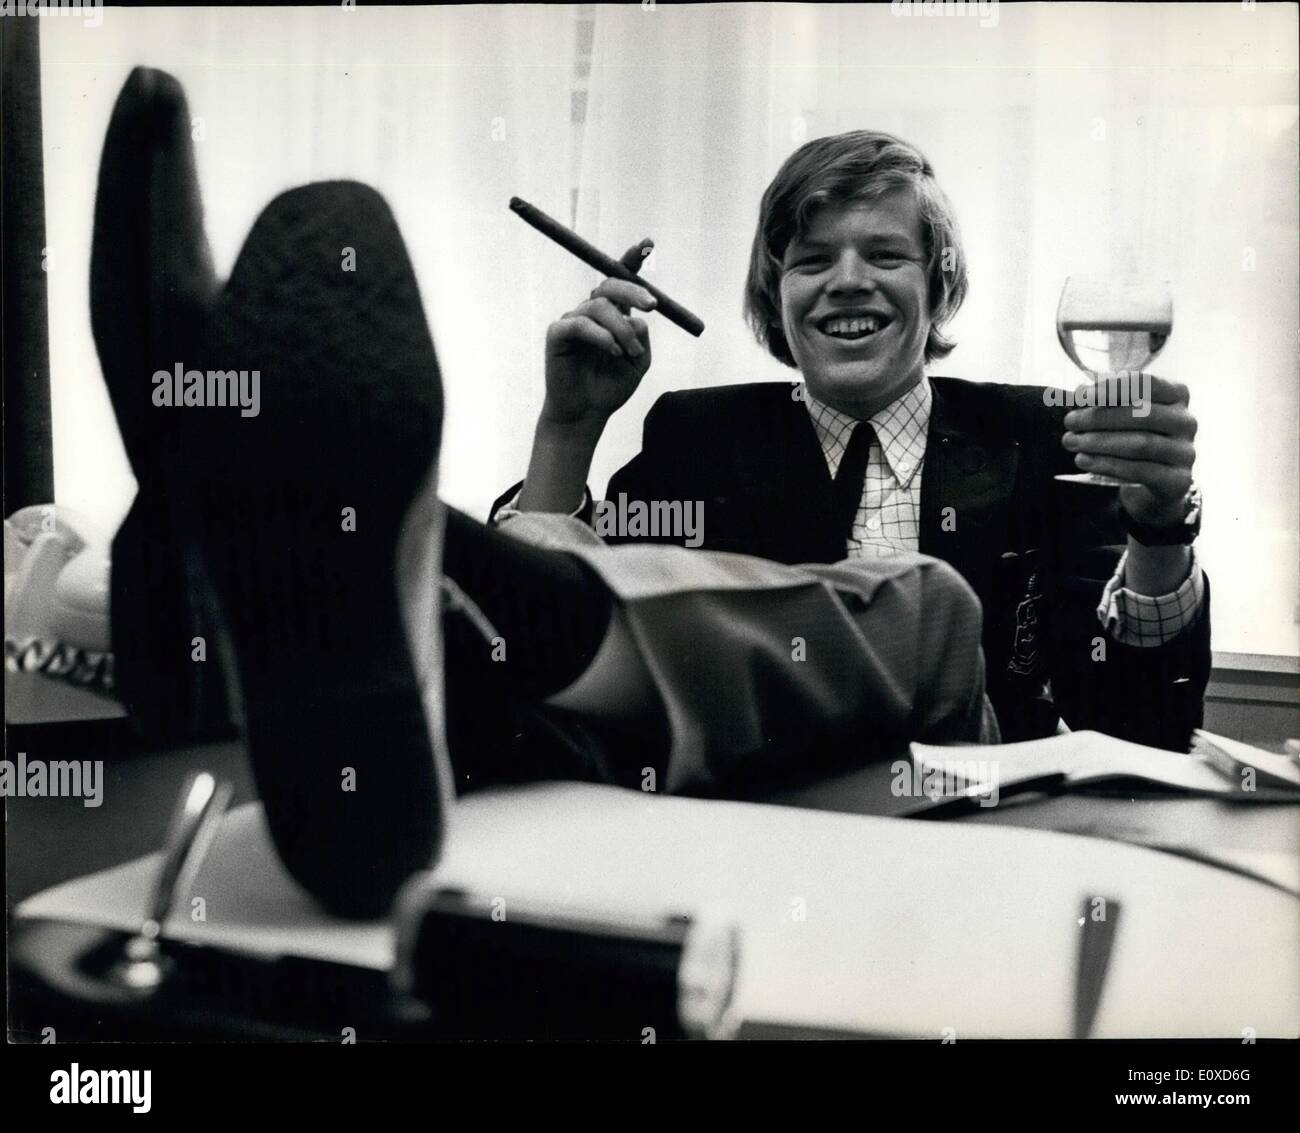 Jun. 06, 1966 - HERMAN AND HIS FOUR HERMITS SIGN MÃ¢â‚¬Å¾Goht FILM CO CT 3 CH BRIMS THEM A COOL Li 6 0.007. Yesterday HERMAN (PETER SHONE) and his four HERMITS signed a film contrast with M.G.M. That will bring them in a cool t1,650,000 ever the next five year.. He and his group regularly oust the BEATLES in America where they will be going on tour next week. PHOTO SHOWN: 18 year old HERMAN (real name PNTNR BOONE) sits back with a celebration drink and a long cigar adding that tycoon touch to the rouagiat aver pap atar to join the millionaire vet. Stock Photo